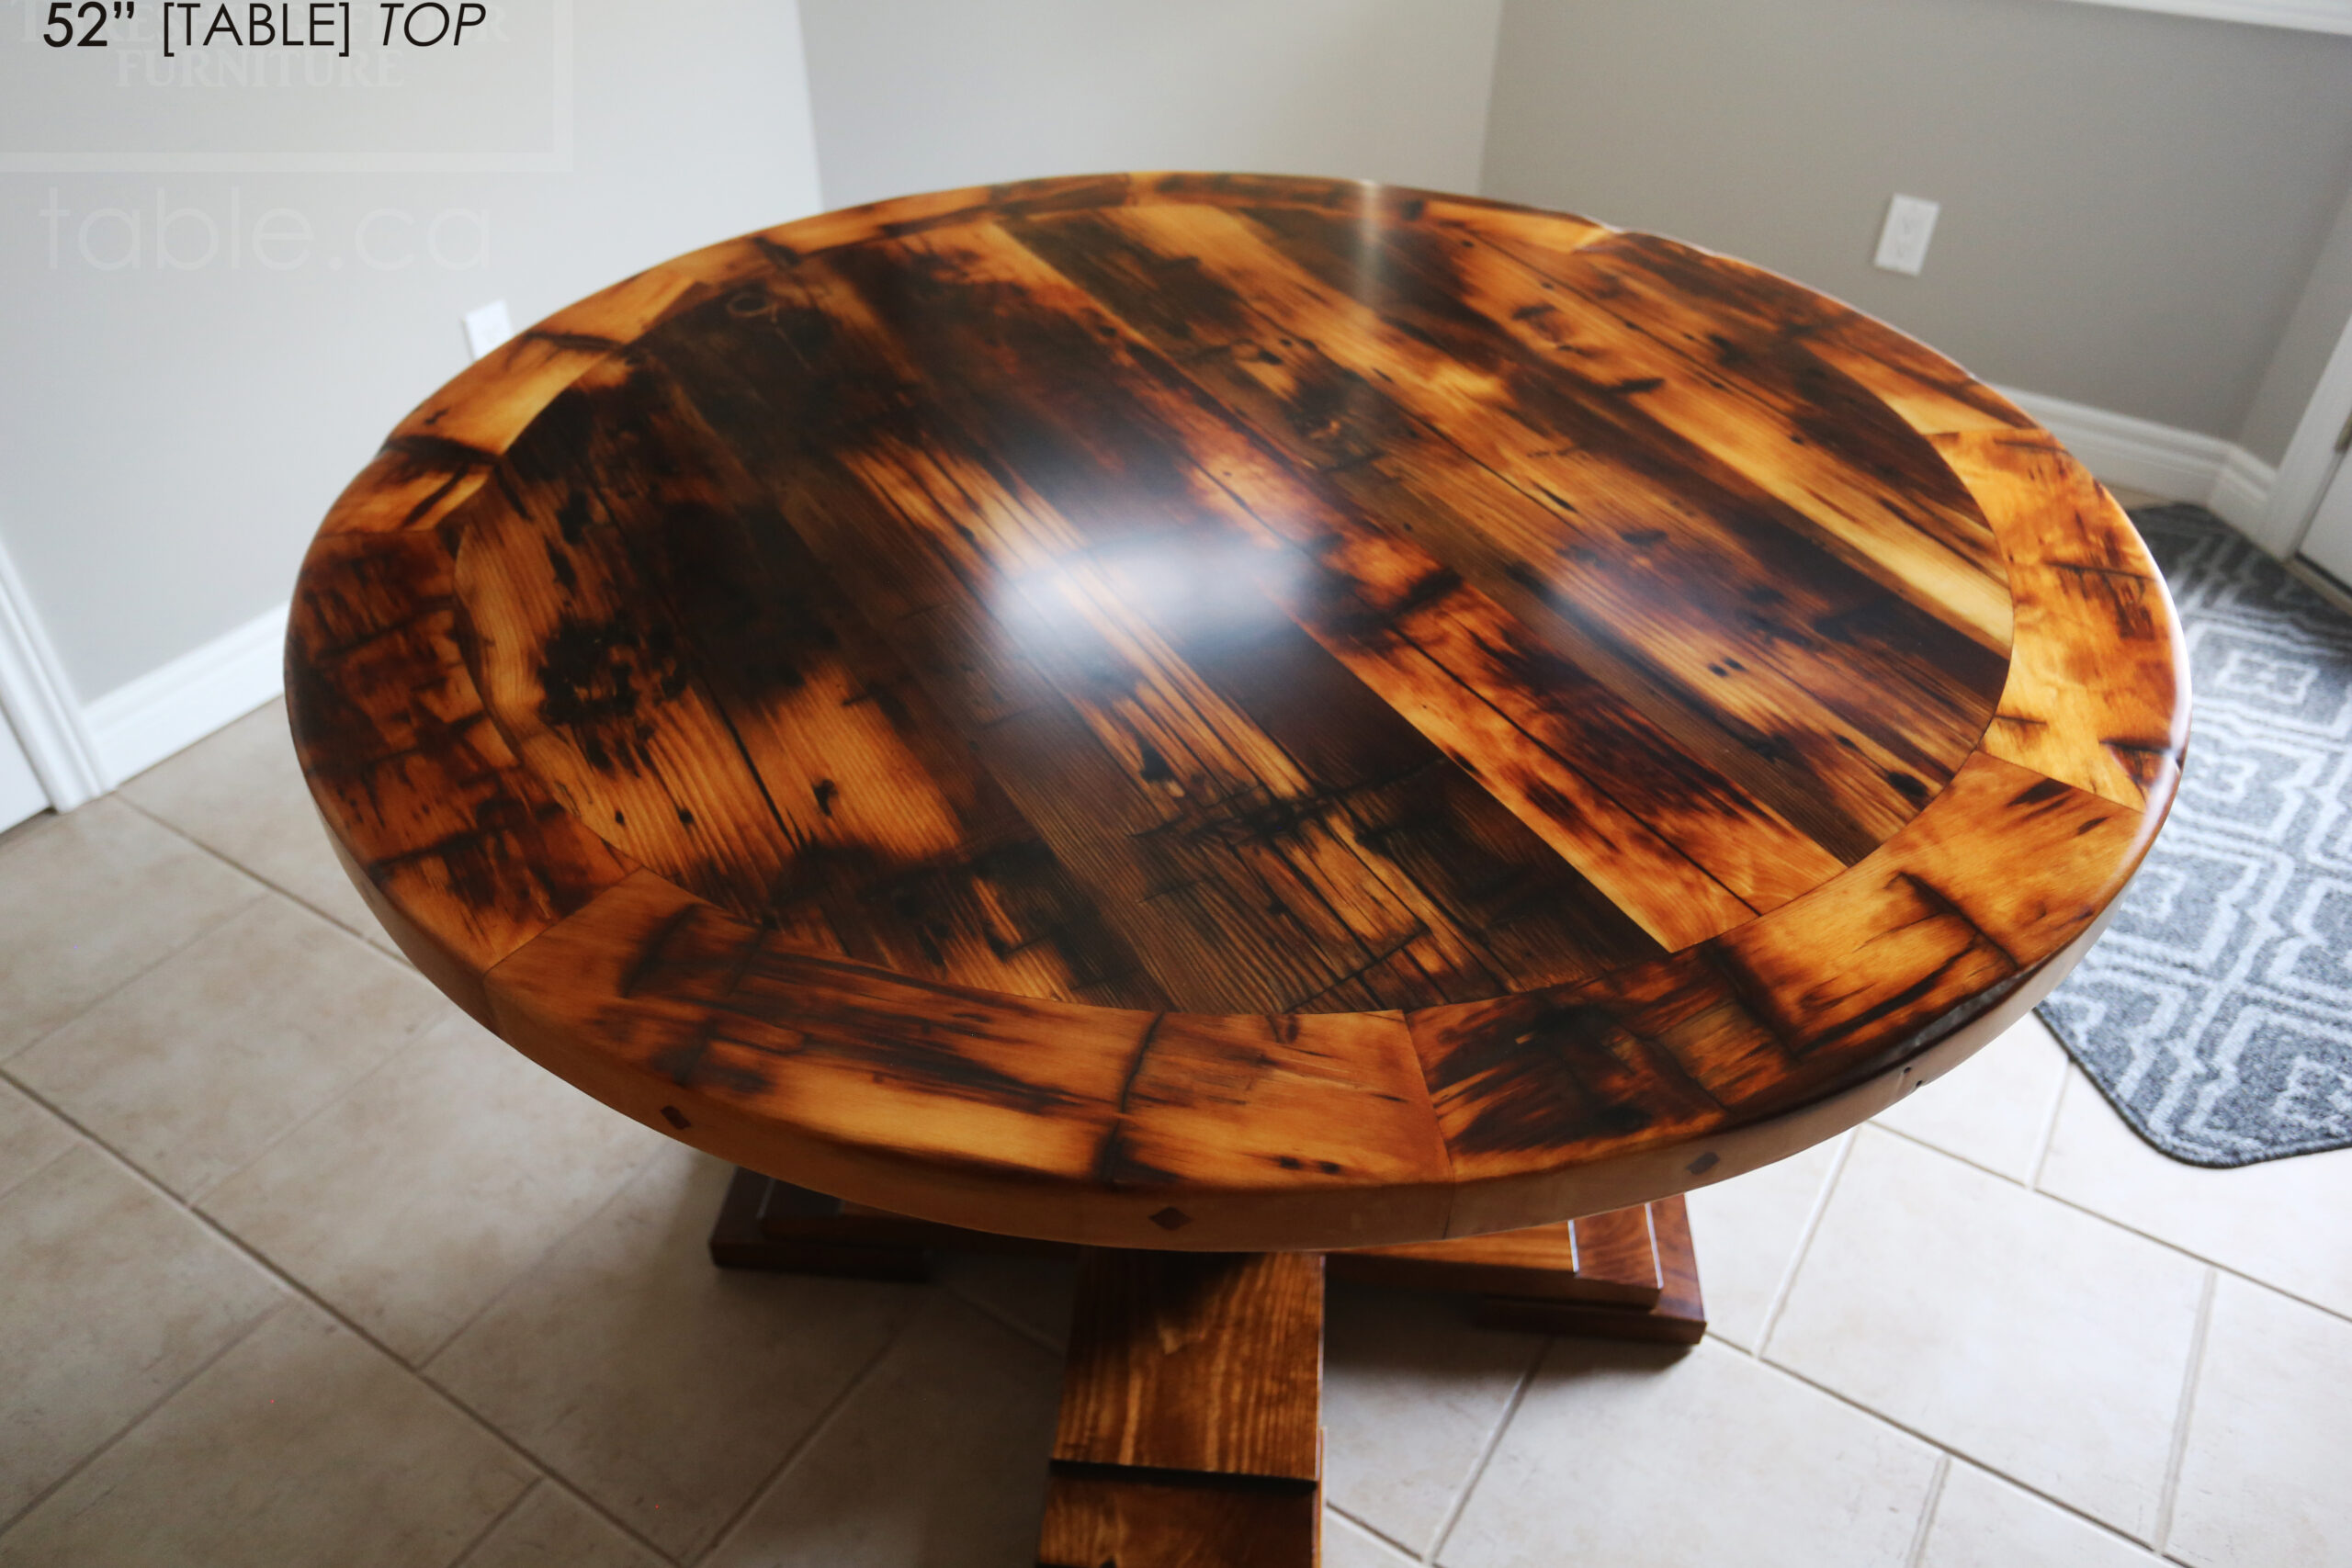 Project Summary: 52” Round Reclaimed Ontario Barnwood Table Top we made for a Tilsonburg customer – [Customer Provided] Old Growth Pine Construction - Original distressing maintained – Circular Bread Edge Boards – Premium epoxy + satin polyurethane finish – Customer base finished to match top - www.table.ca